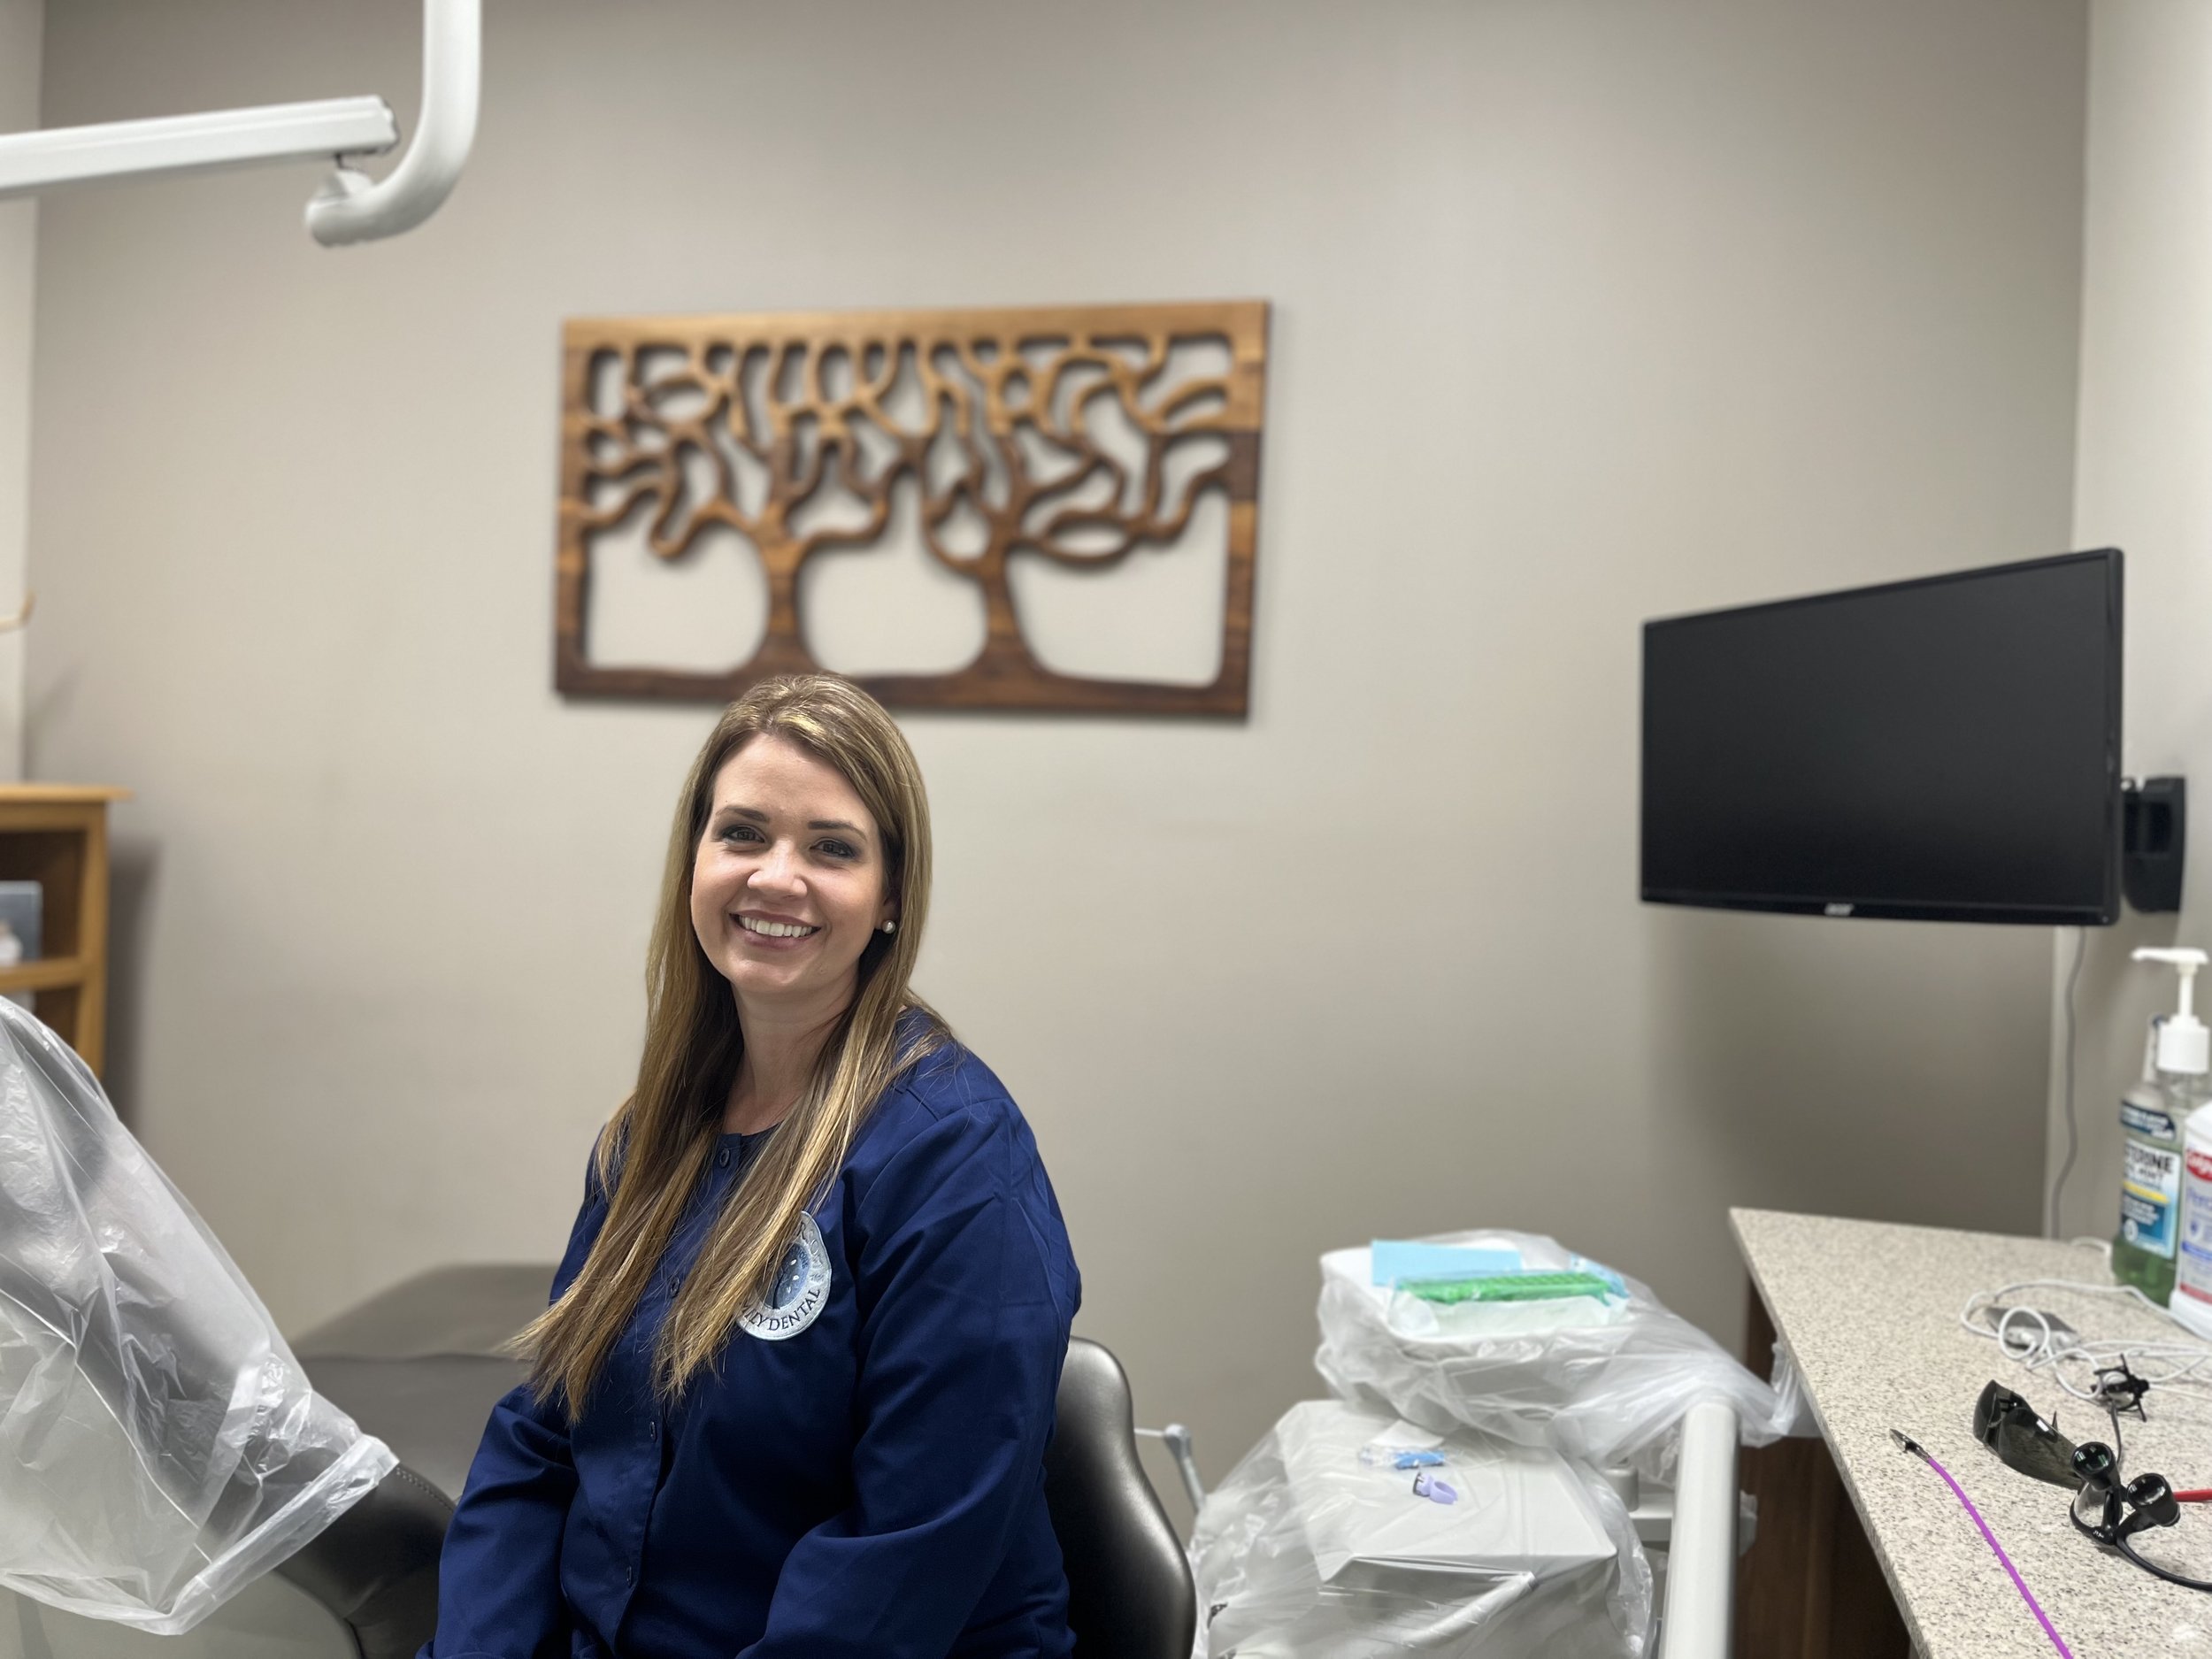 Staff — Patterson Family Dental Care